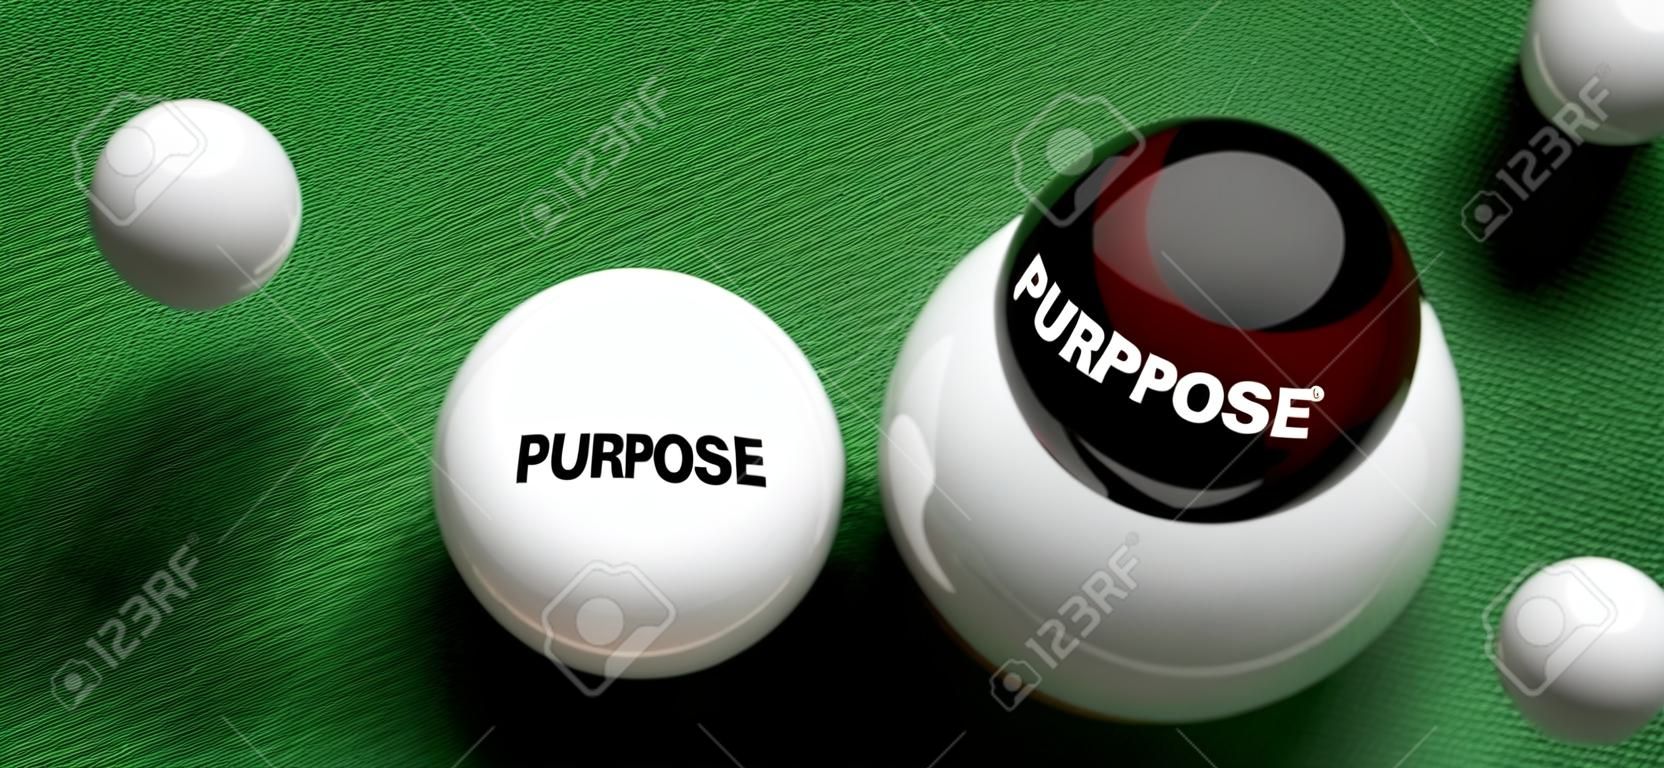 Purpose brings success - pictured as word Purpose on a pool ball, to symbolize that Purpose can initiate success, 3d illustration